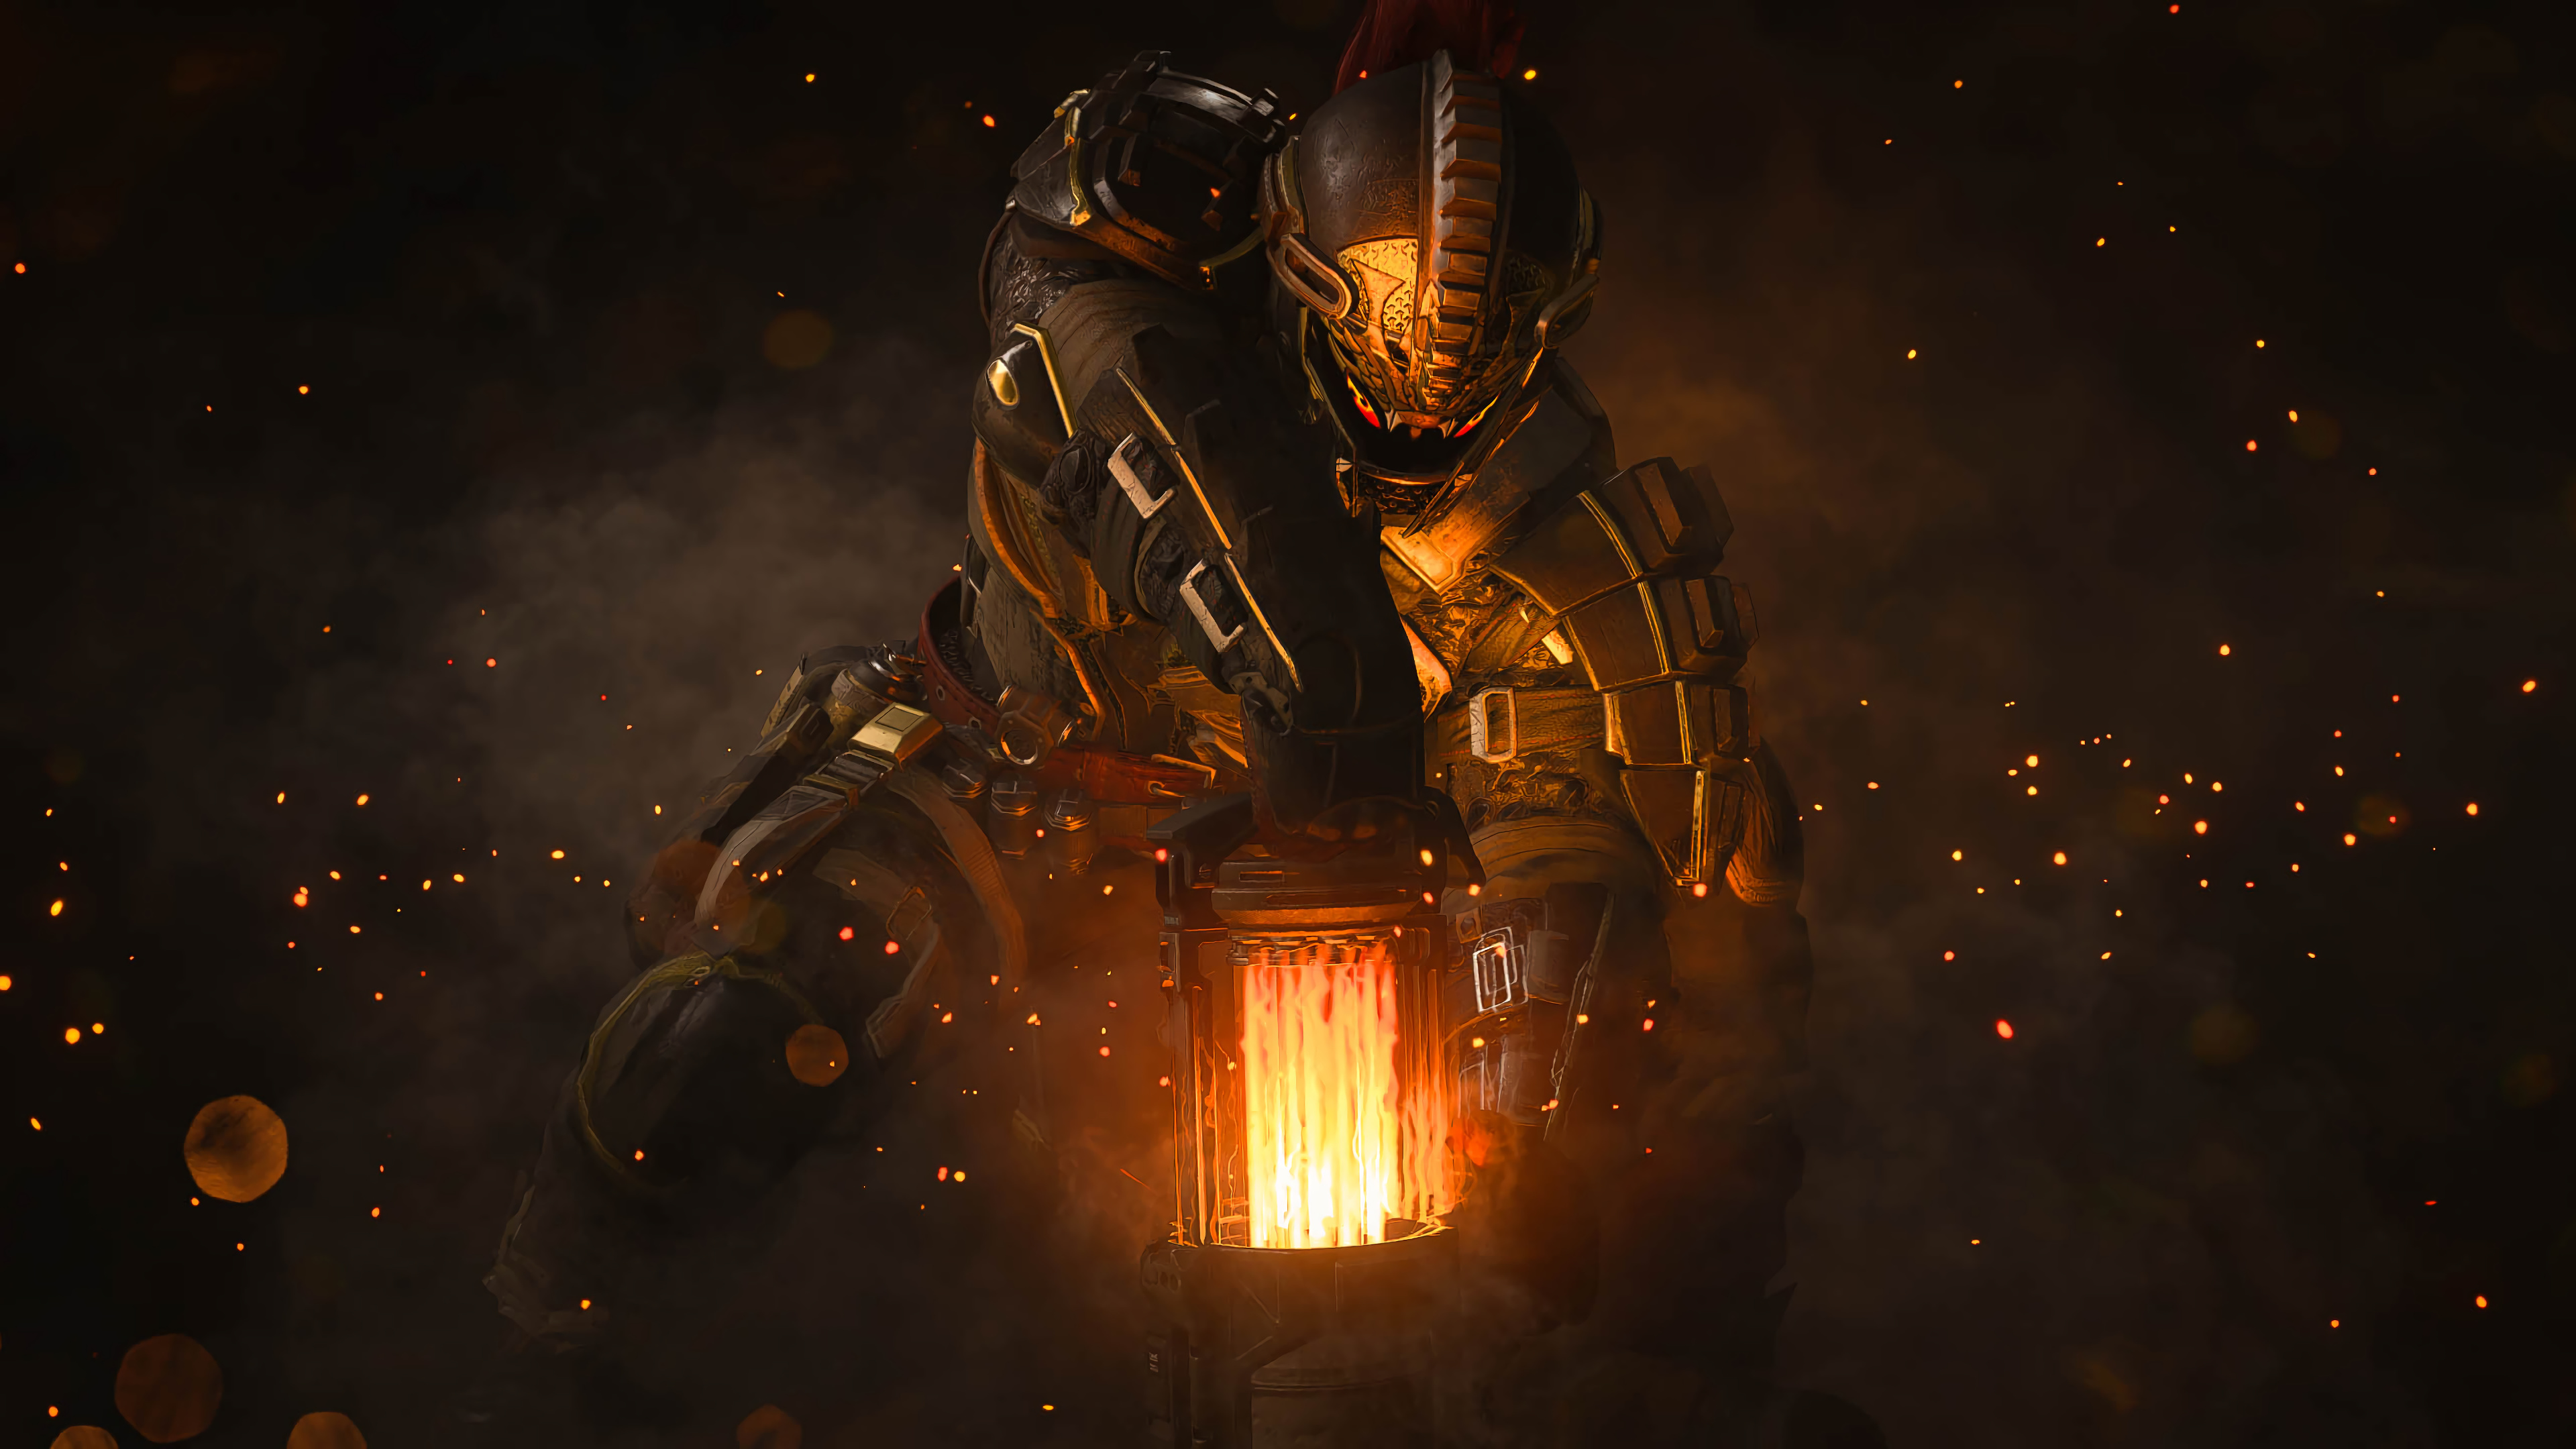 Call Of Of Duty - Call Of Duty Black Ops 4 Wallpaper 4k , HD Wallpaper & Backgrounds